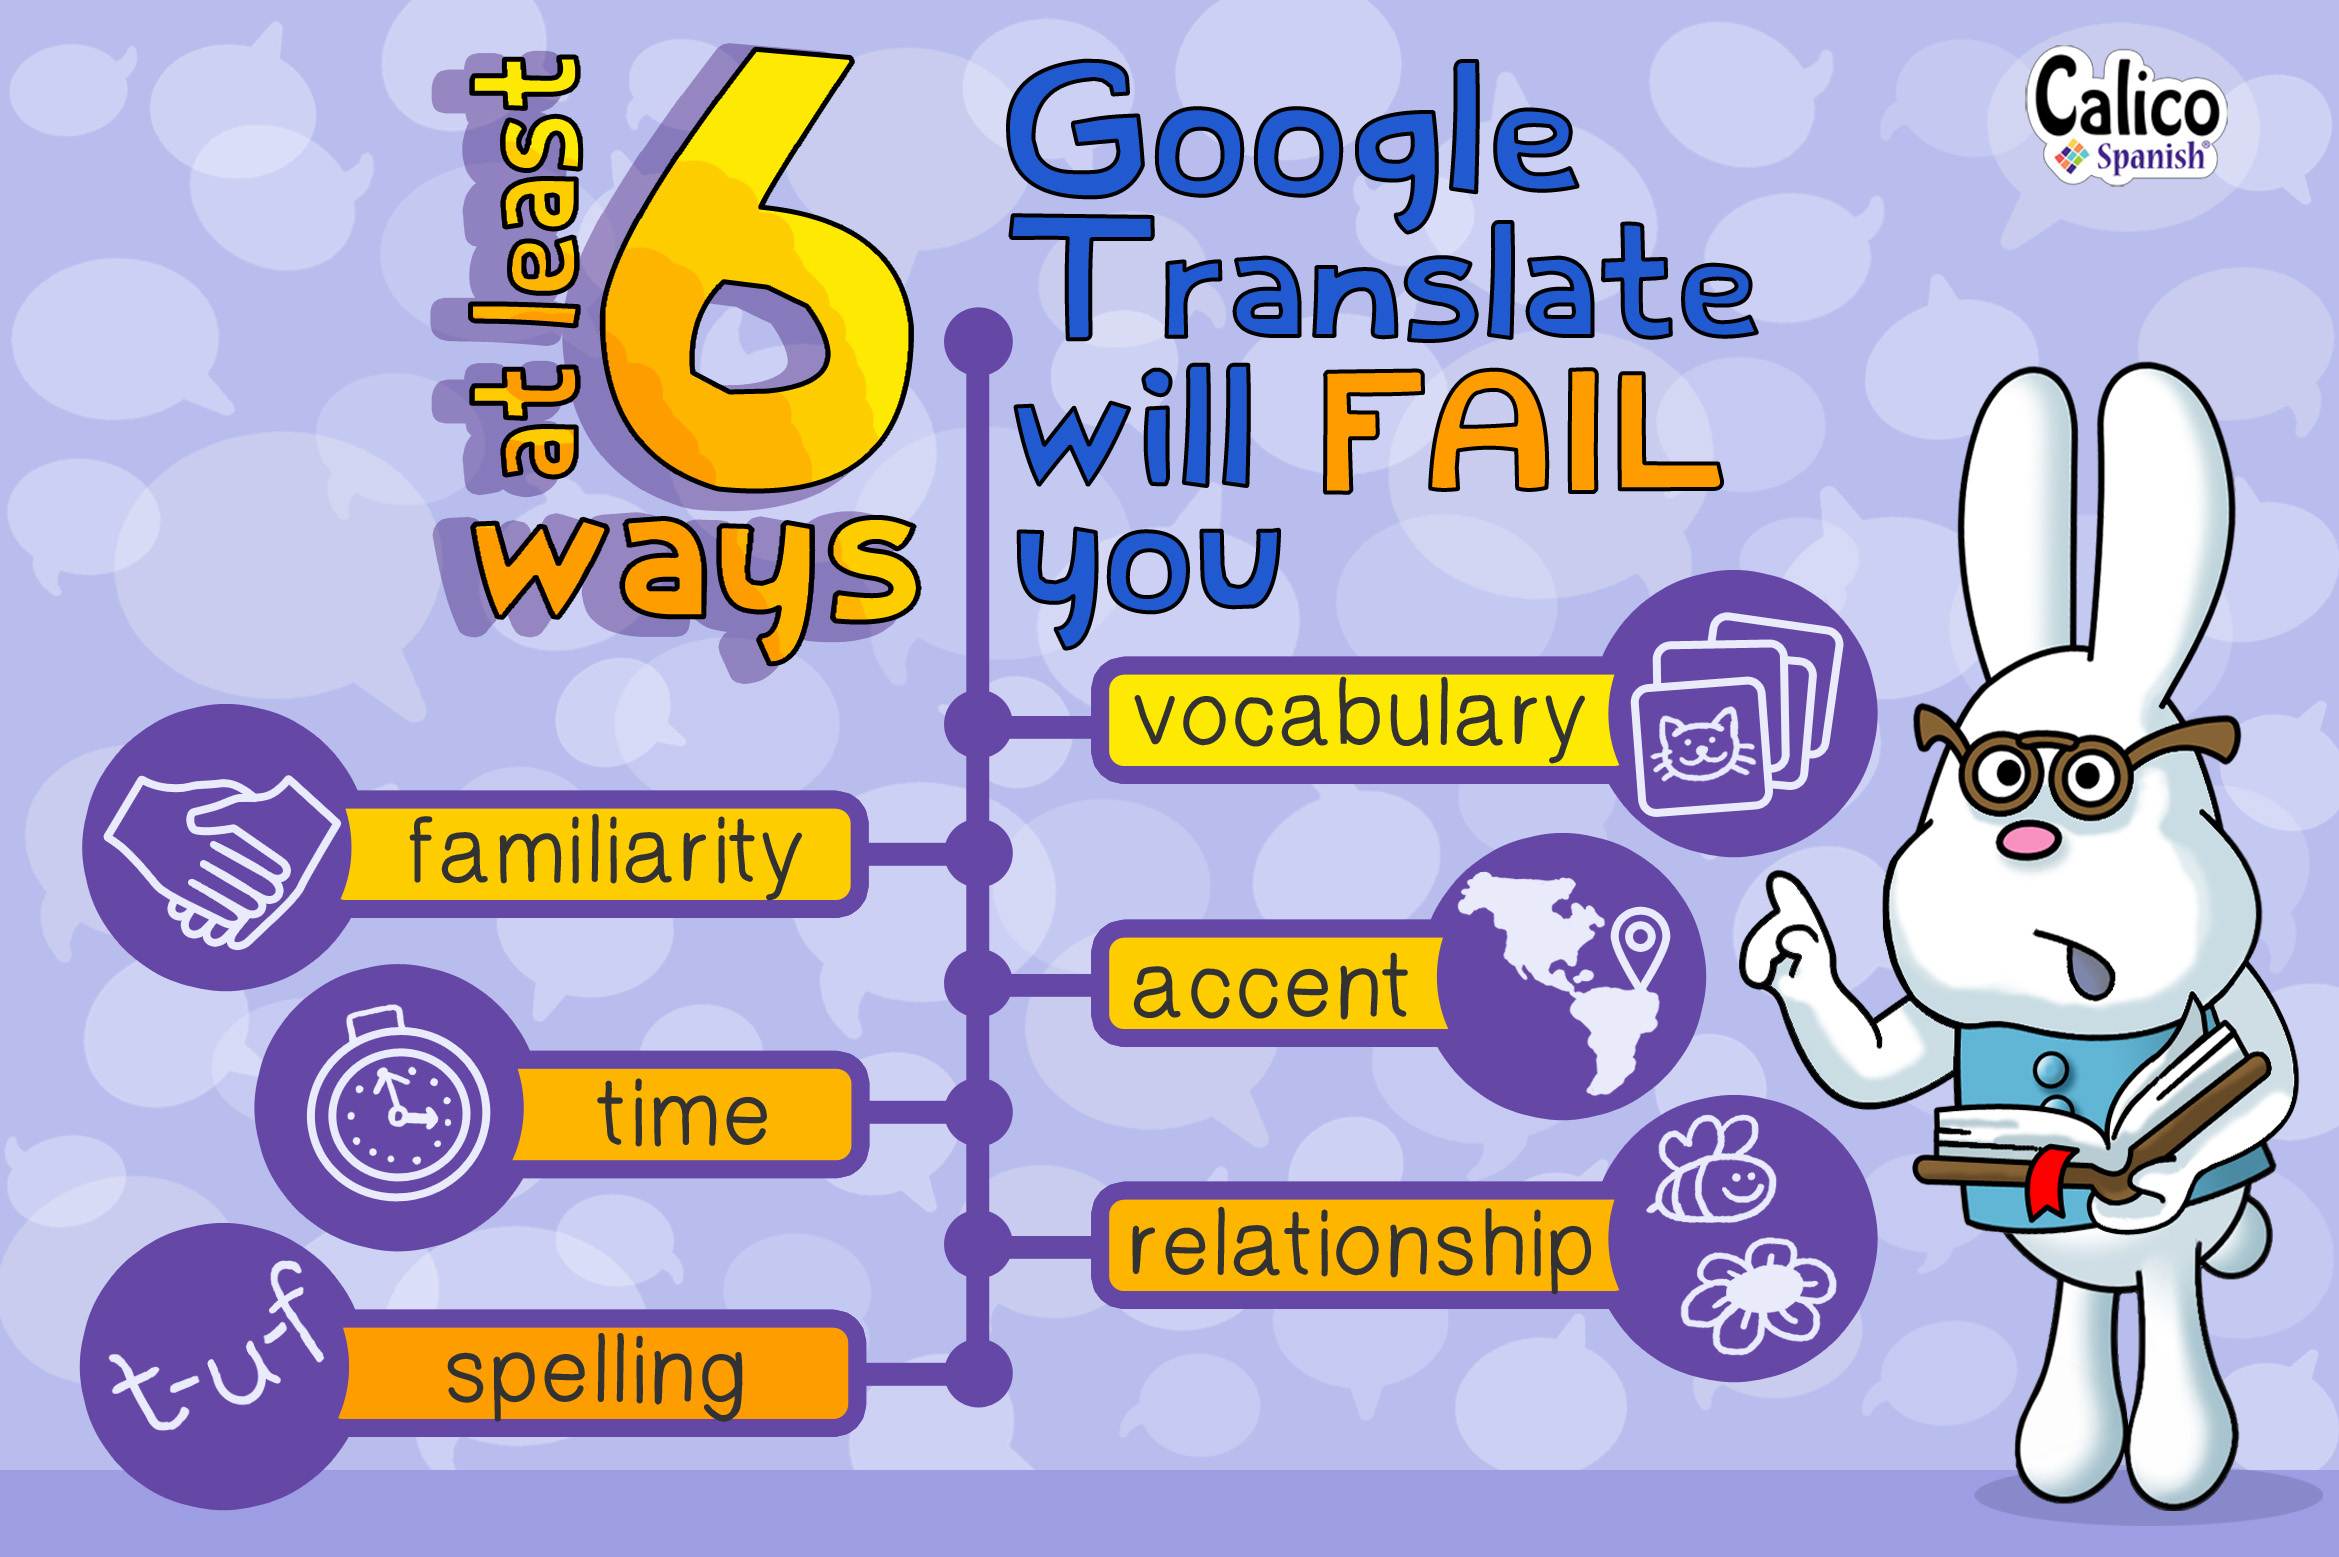 Six ways Google Translate will fail you: Vocabulary, familiarity, accent, time, relationships, and spelling.